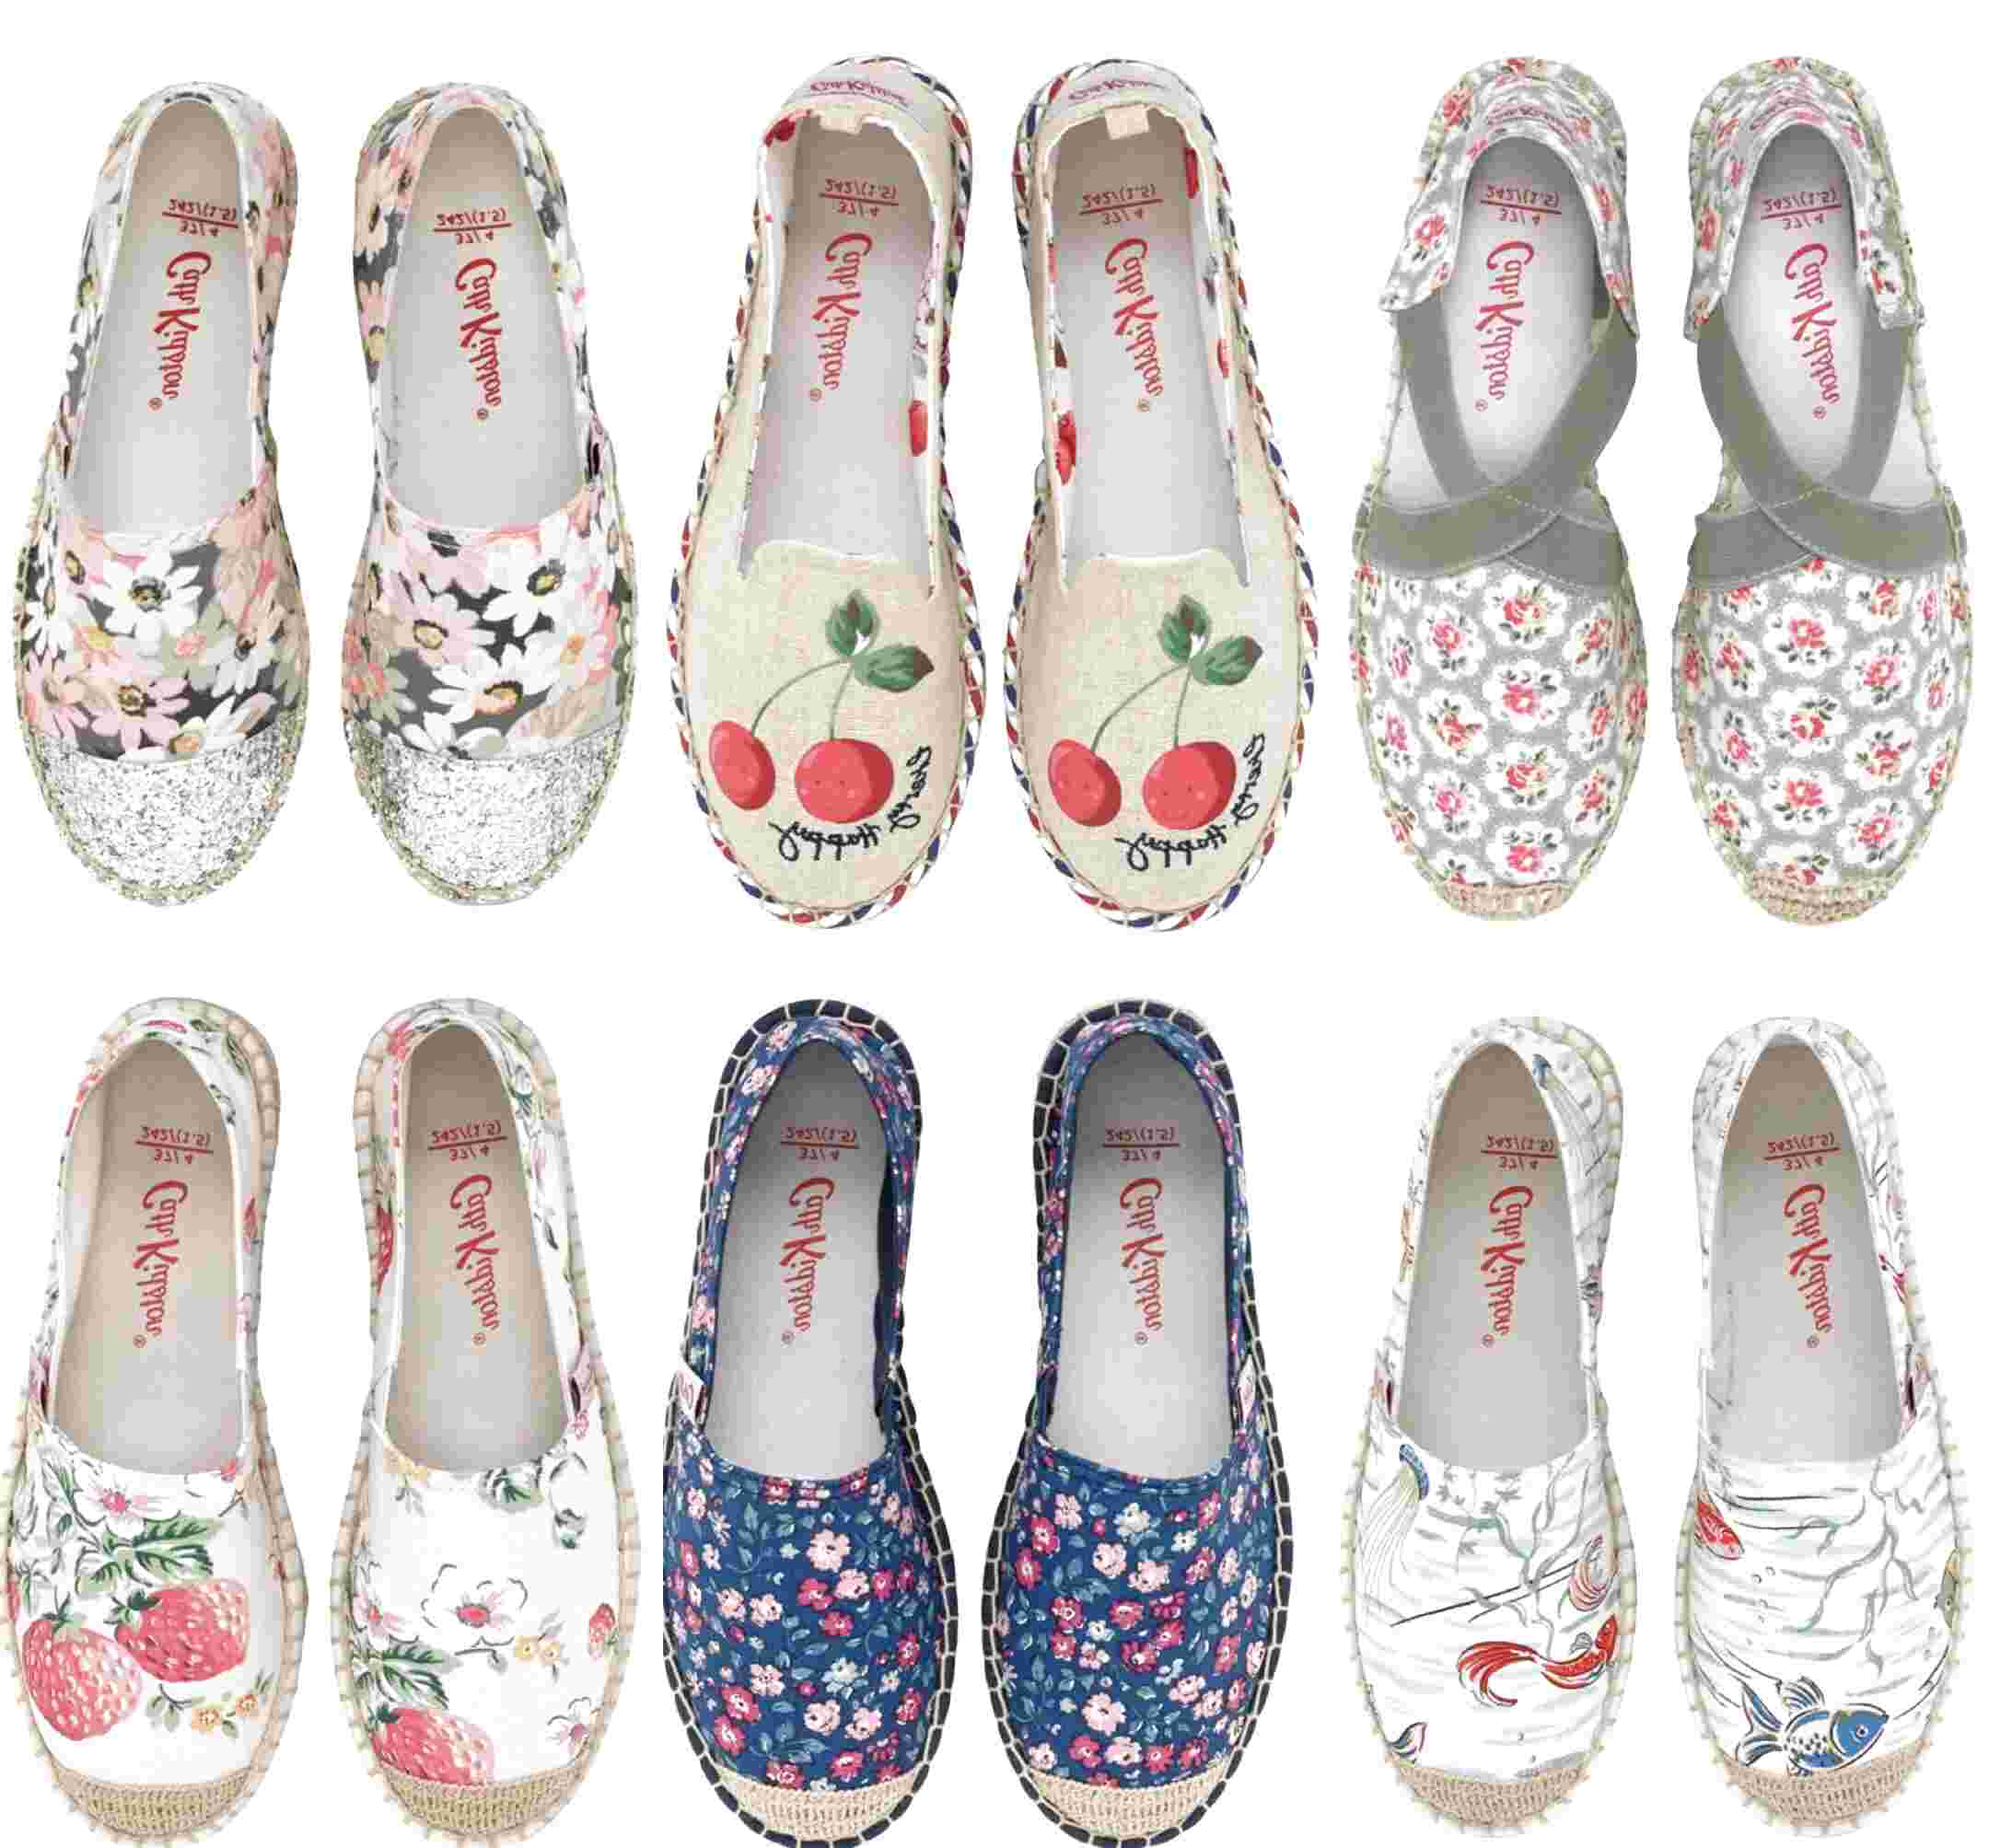 Cath Kidston Shoes for sale in UK 